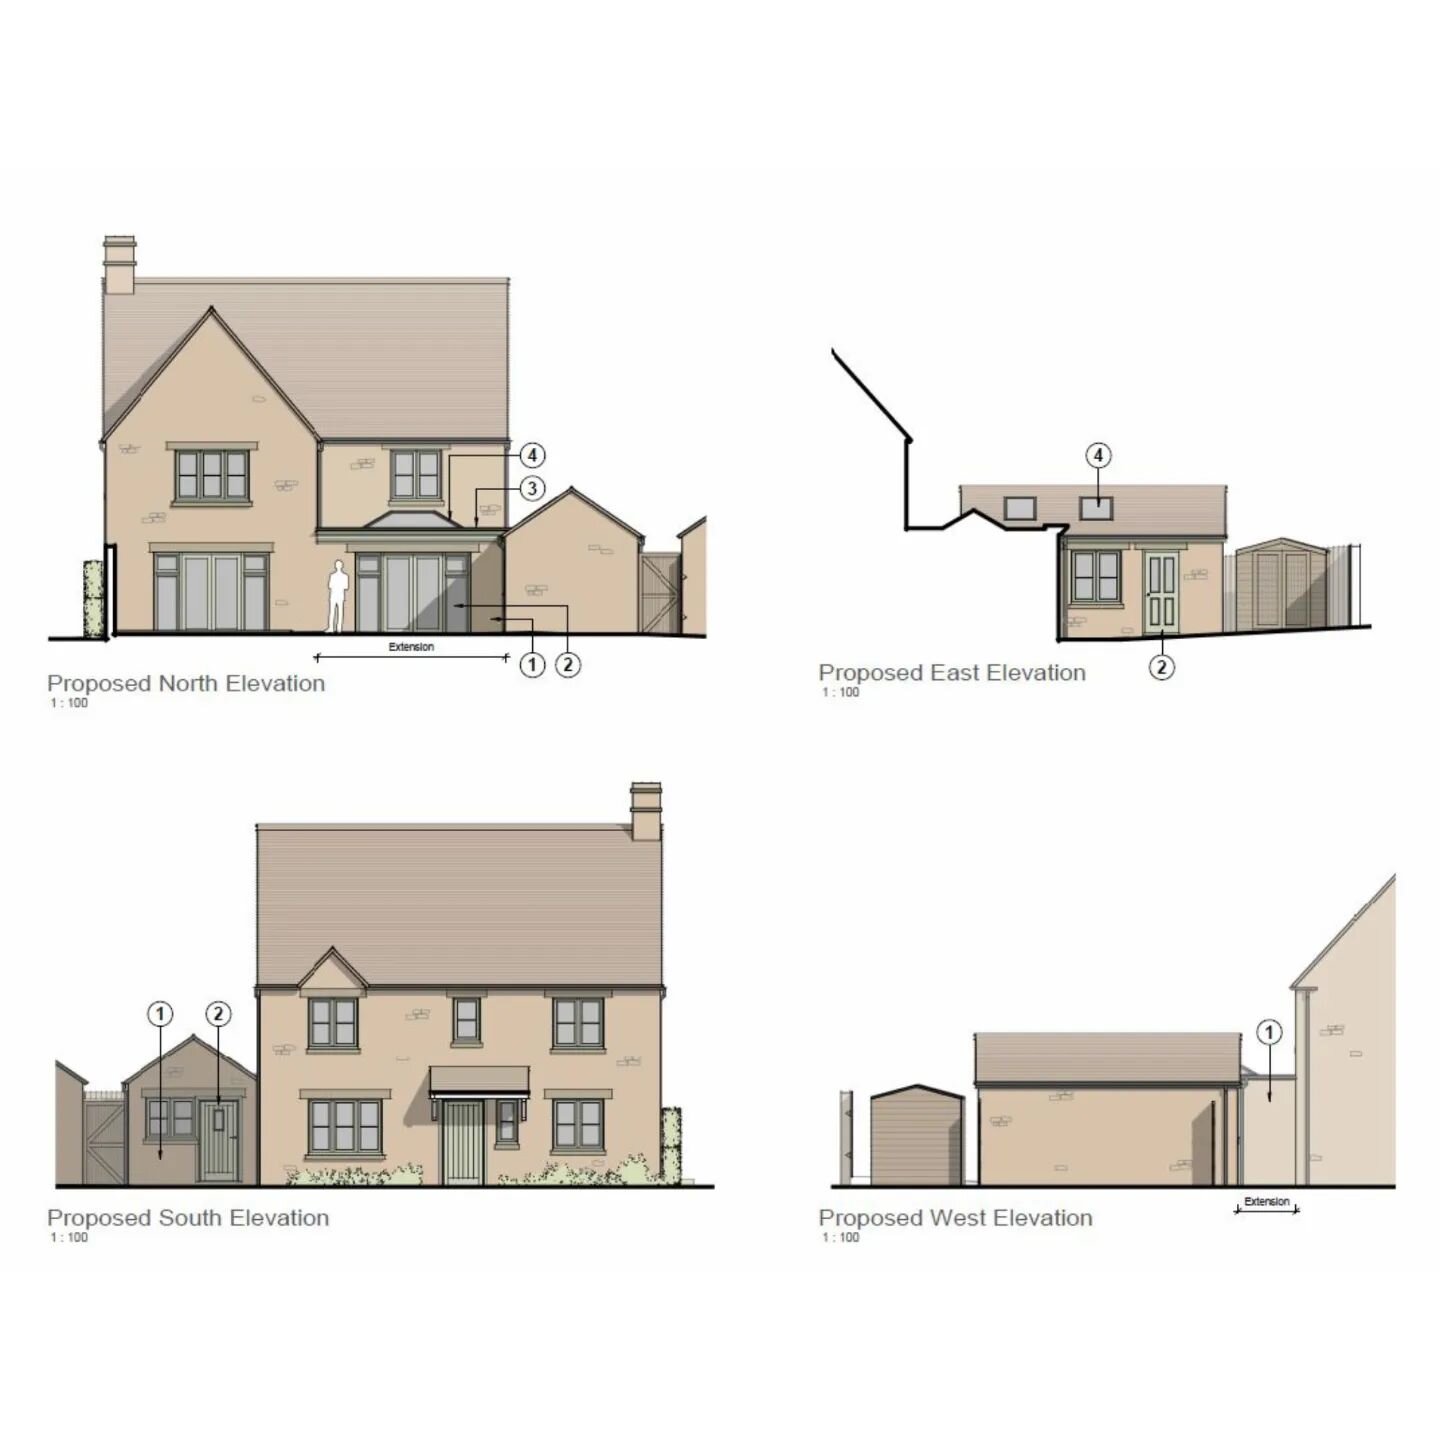 Planning application submitted for a rear extension and garage conversion - adding a playroom, boot room and home office to this cotswold stone house in Fairford. 

...

#architecture #cotswolds #architects #construction #building #archilovers #archi